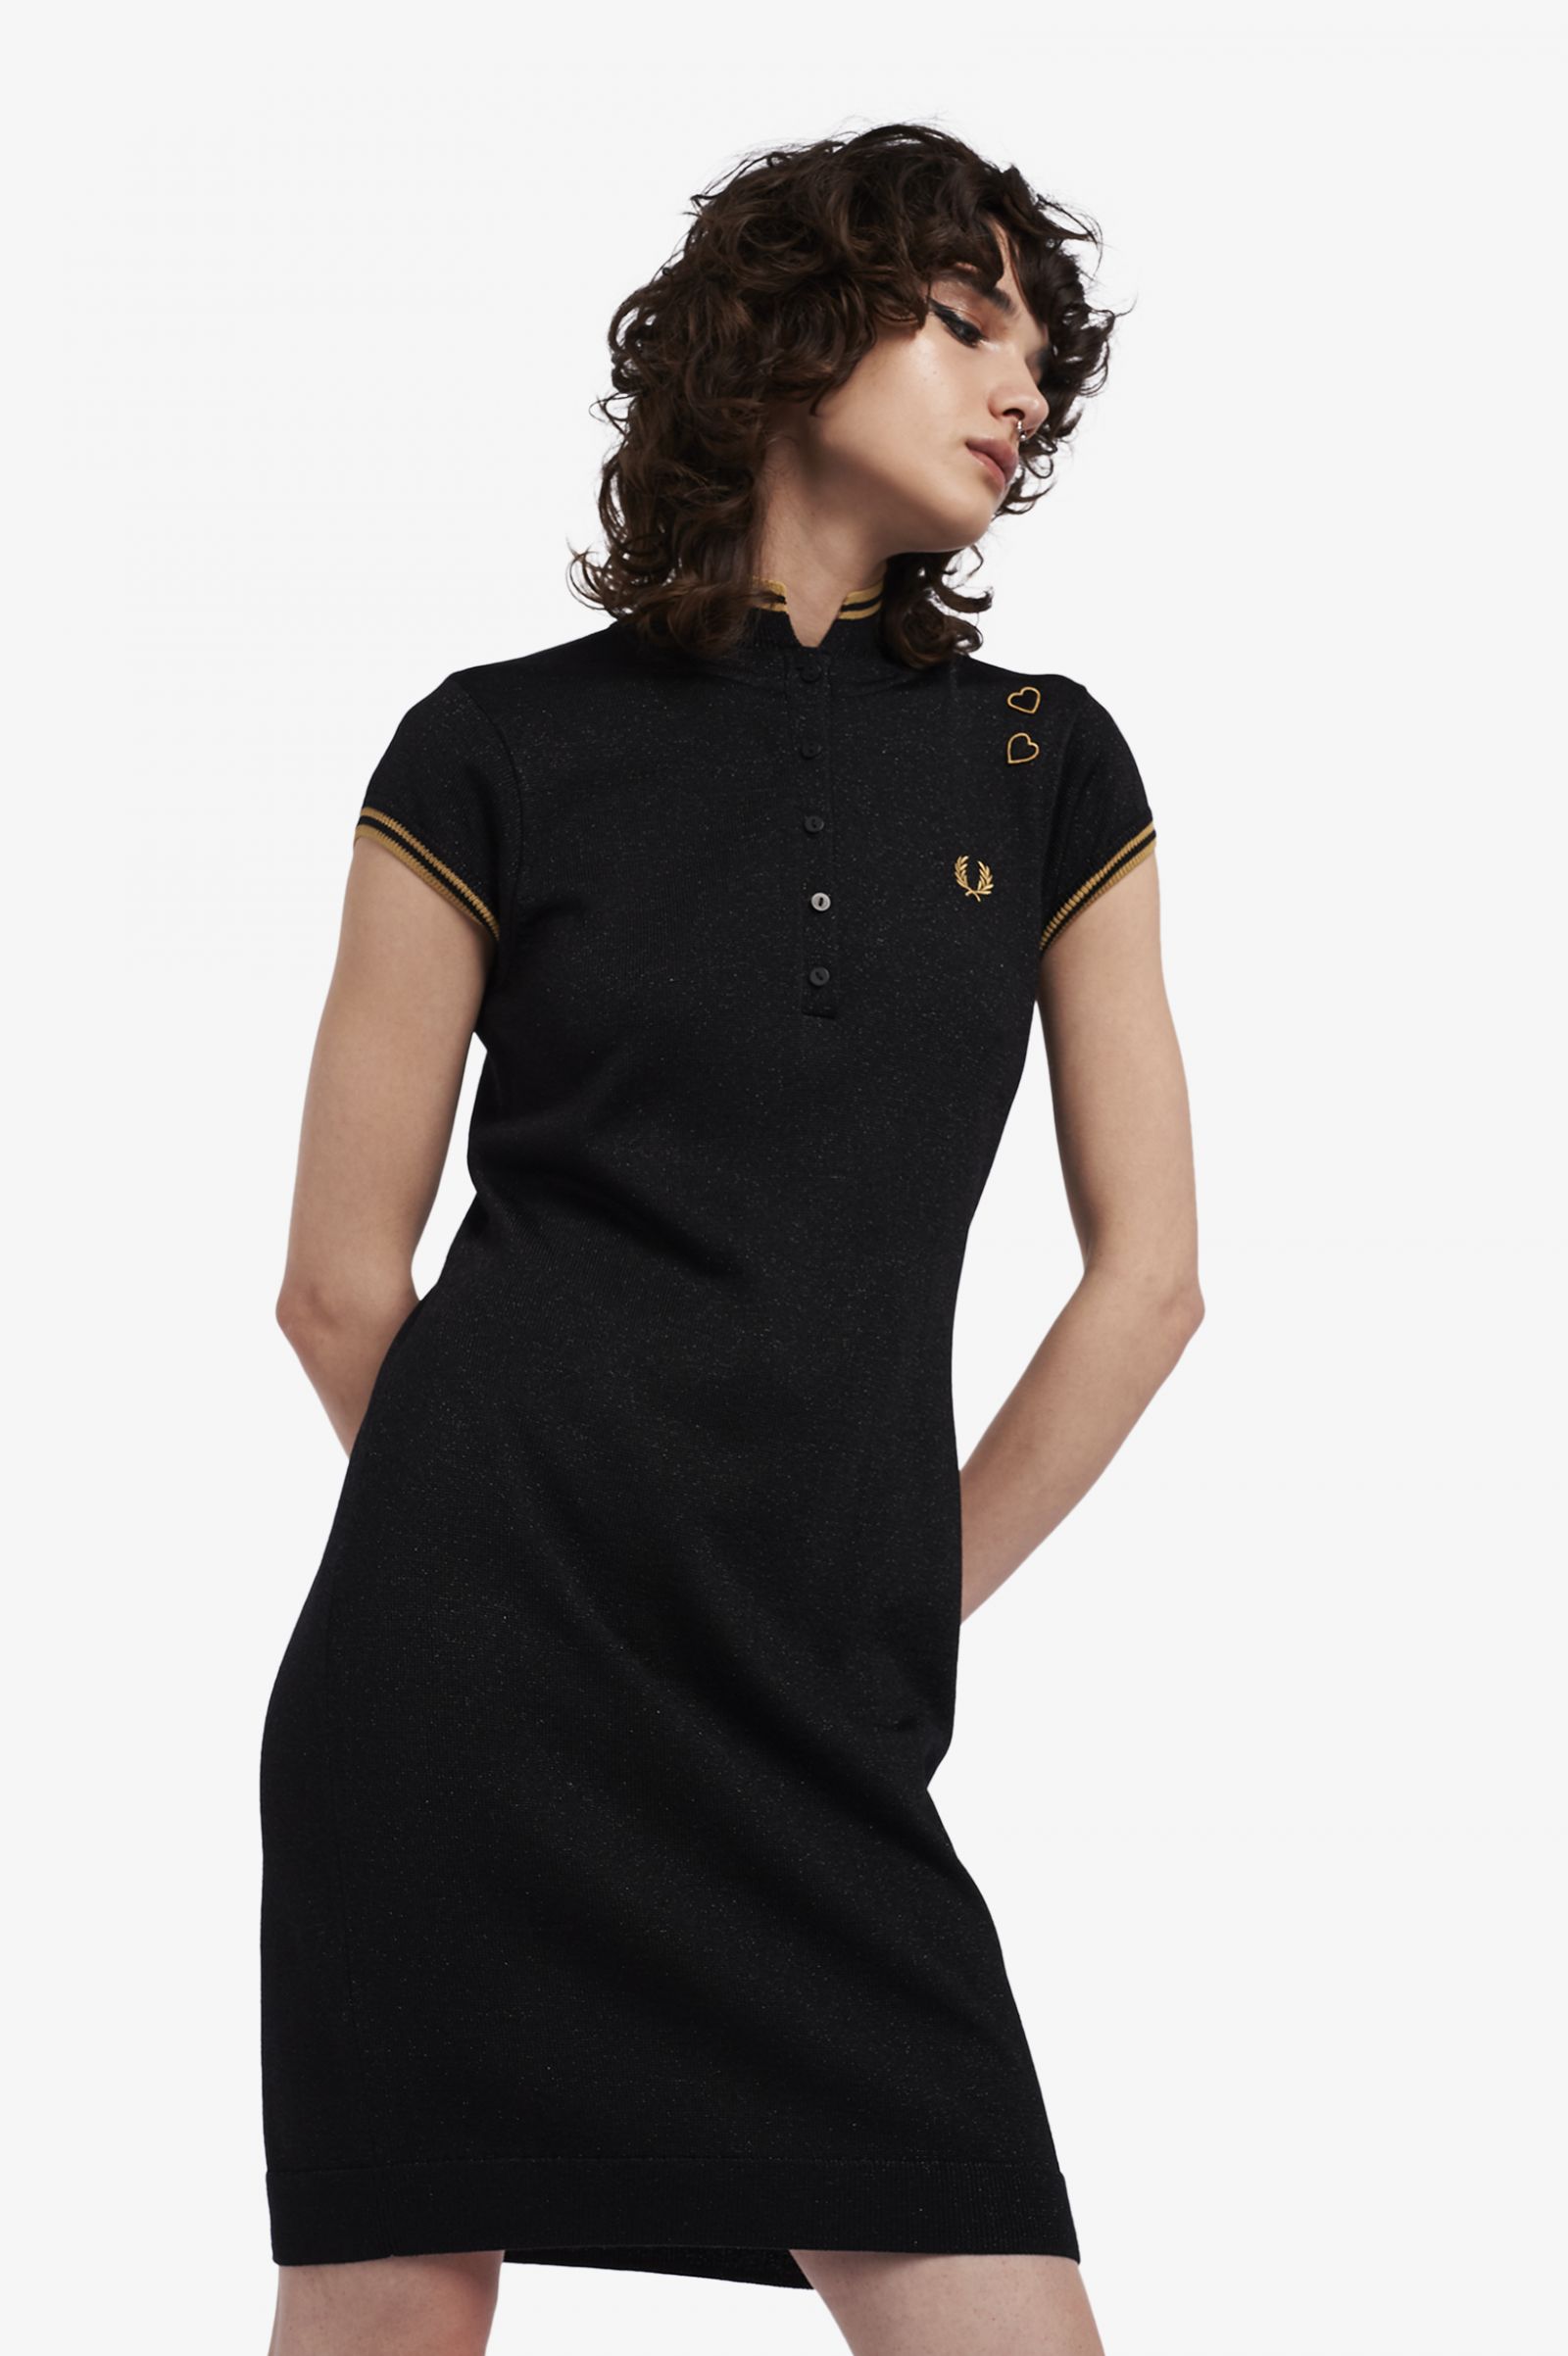 Ladies fred perry dress